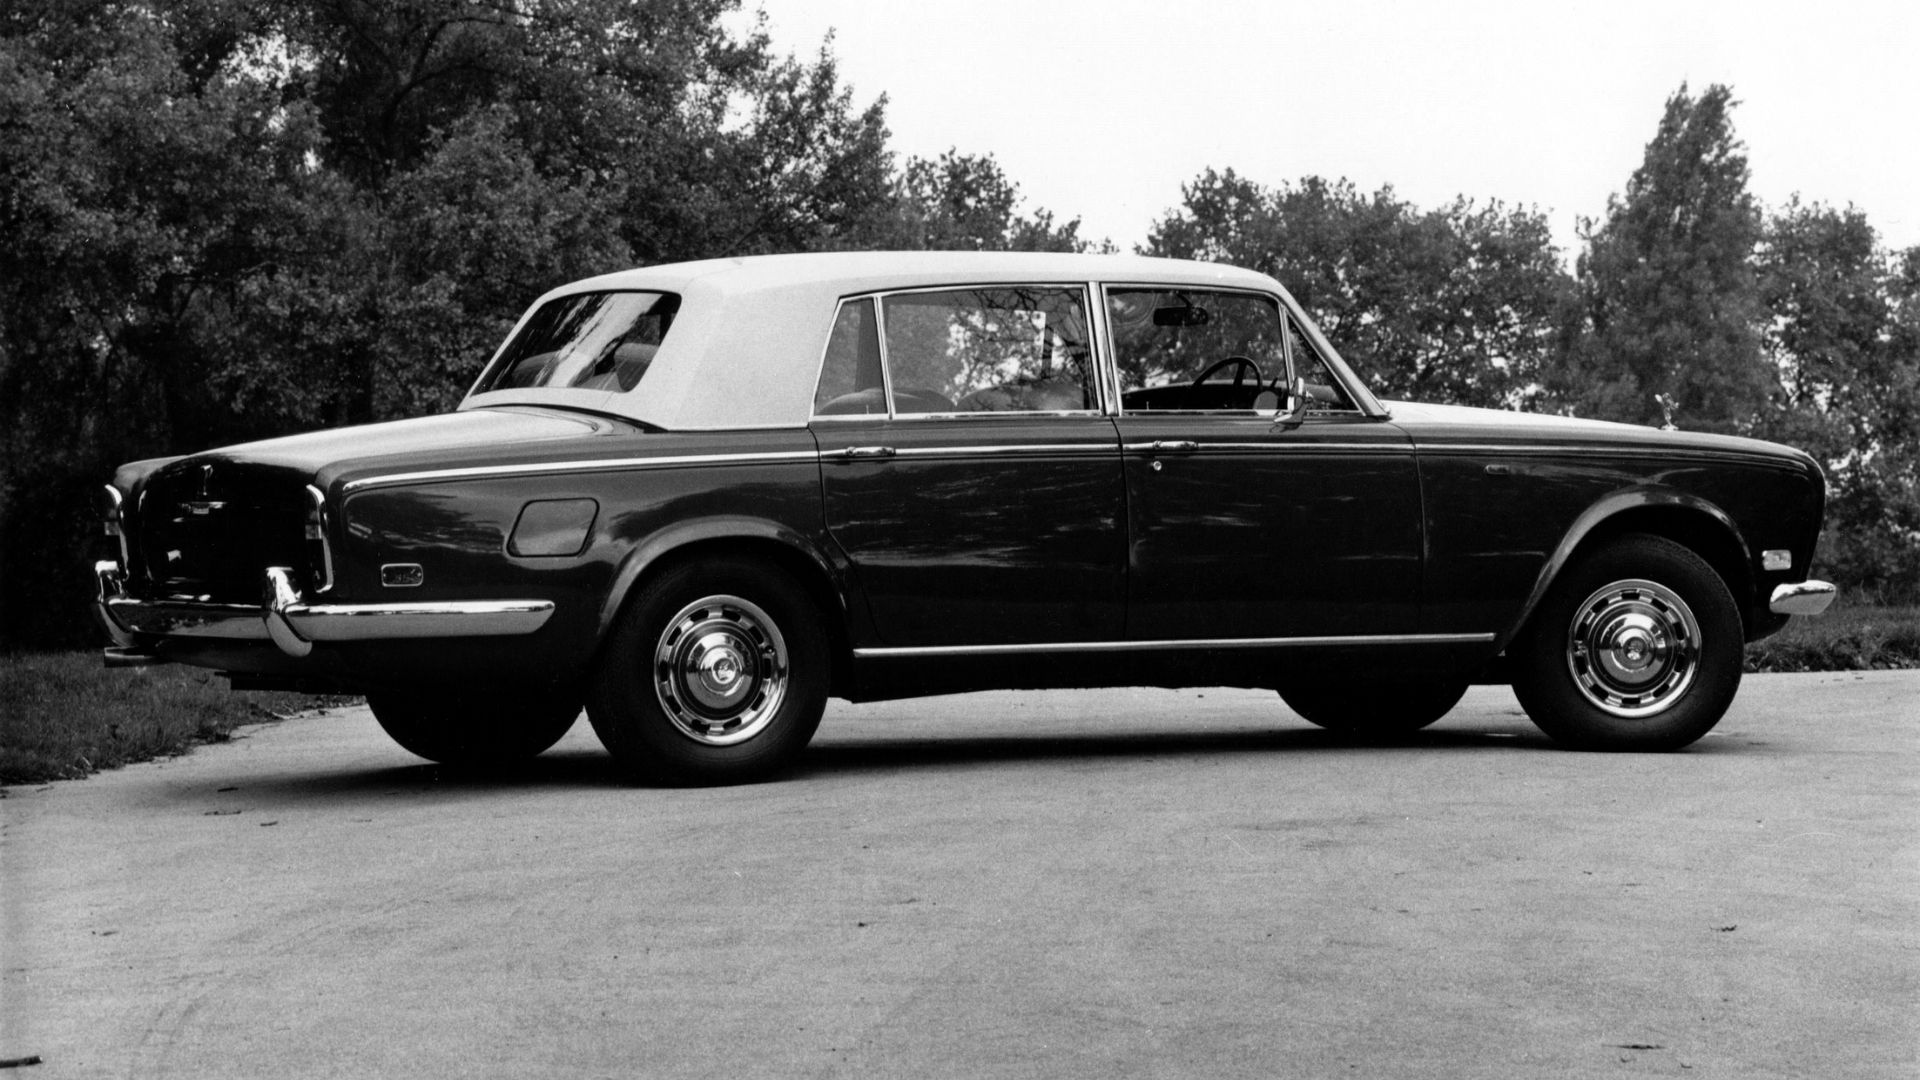 RollsRoyce Silver Shadow Pickup fit for a knight of the realm  Drive